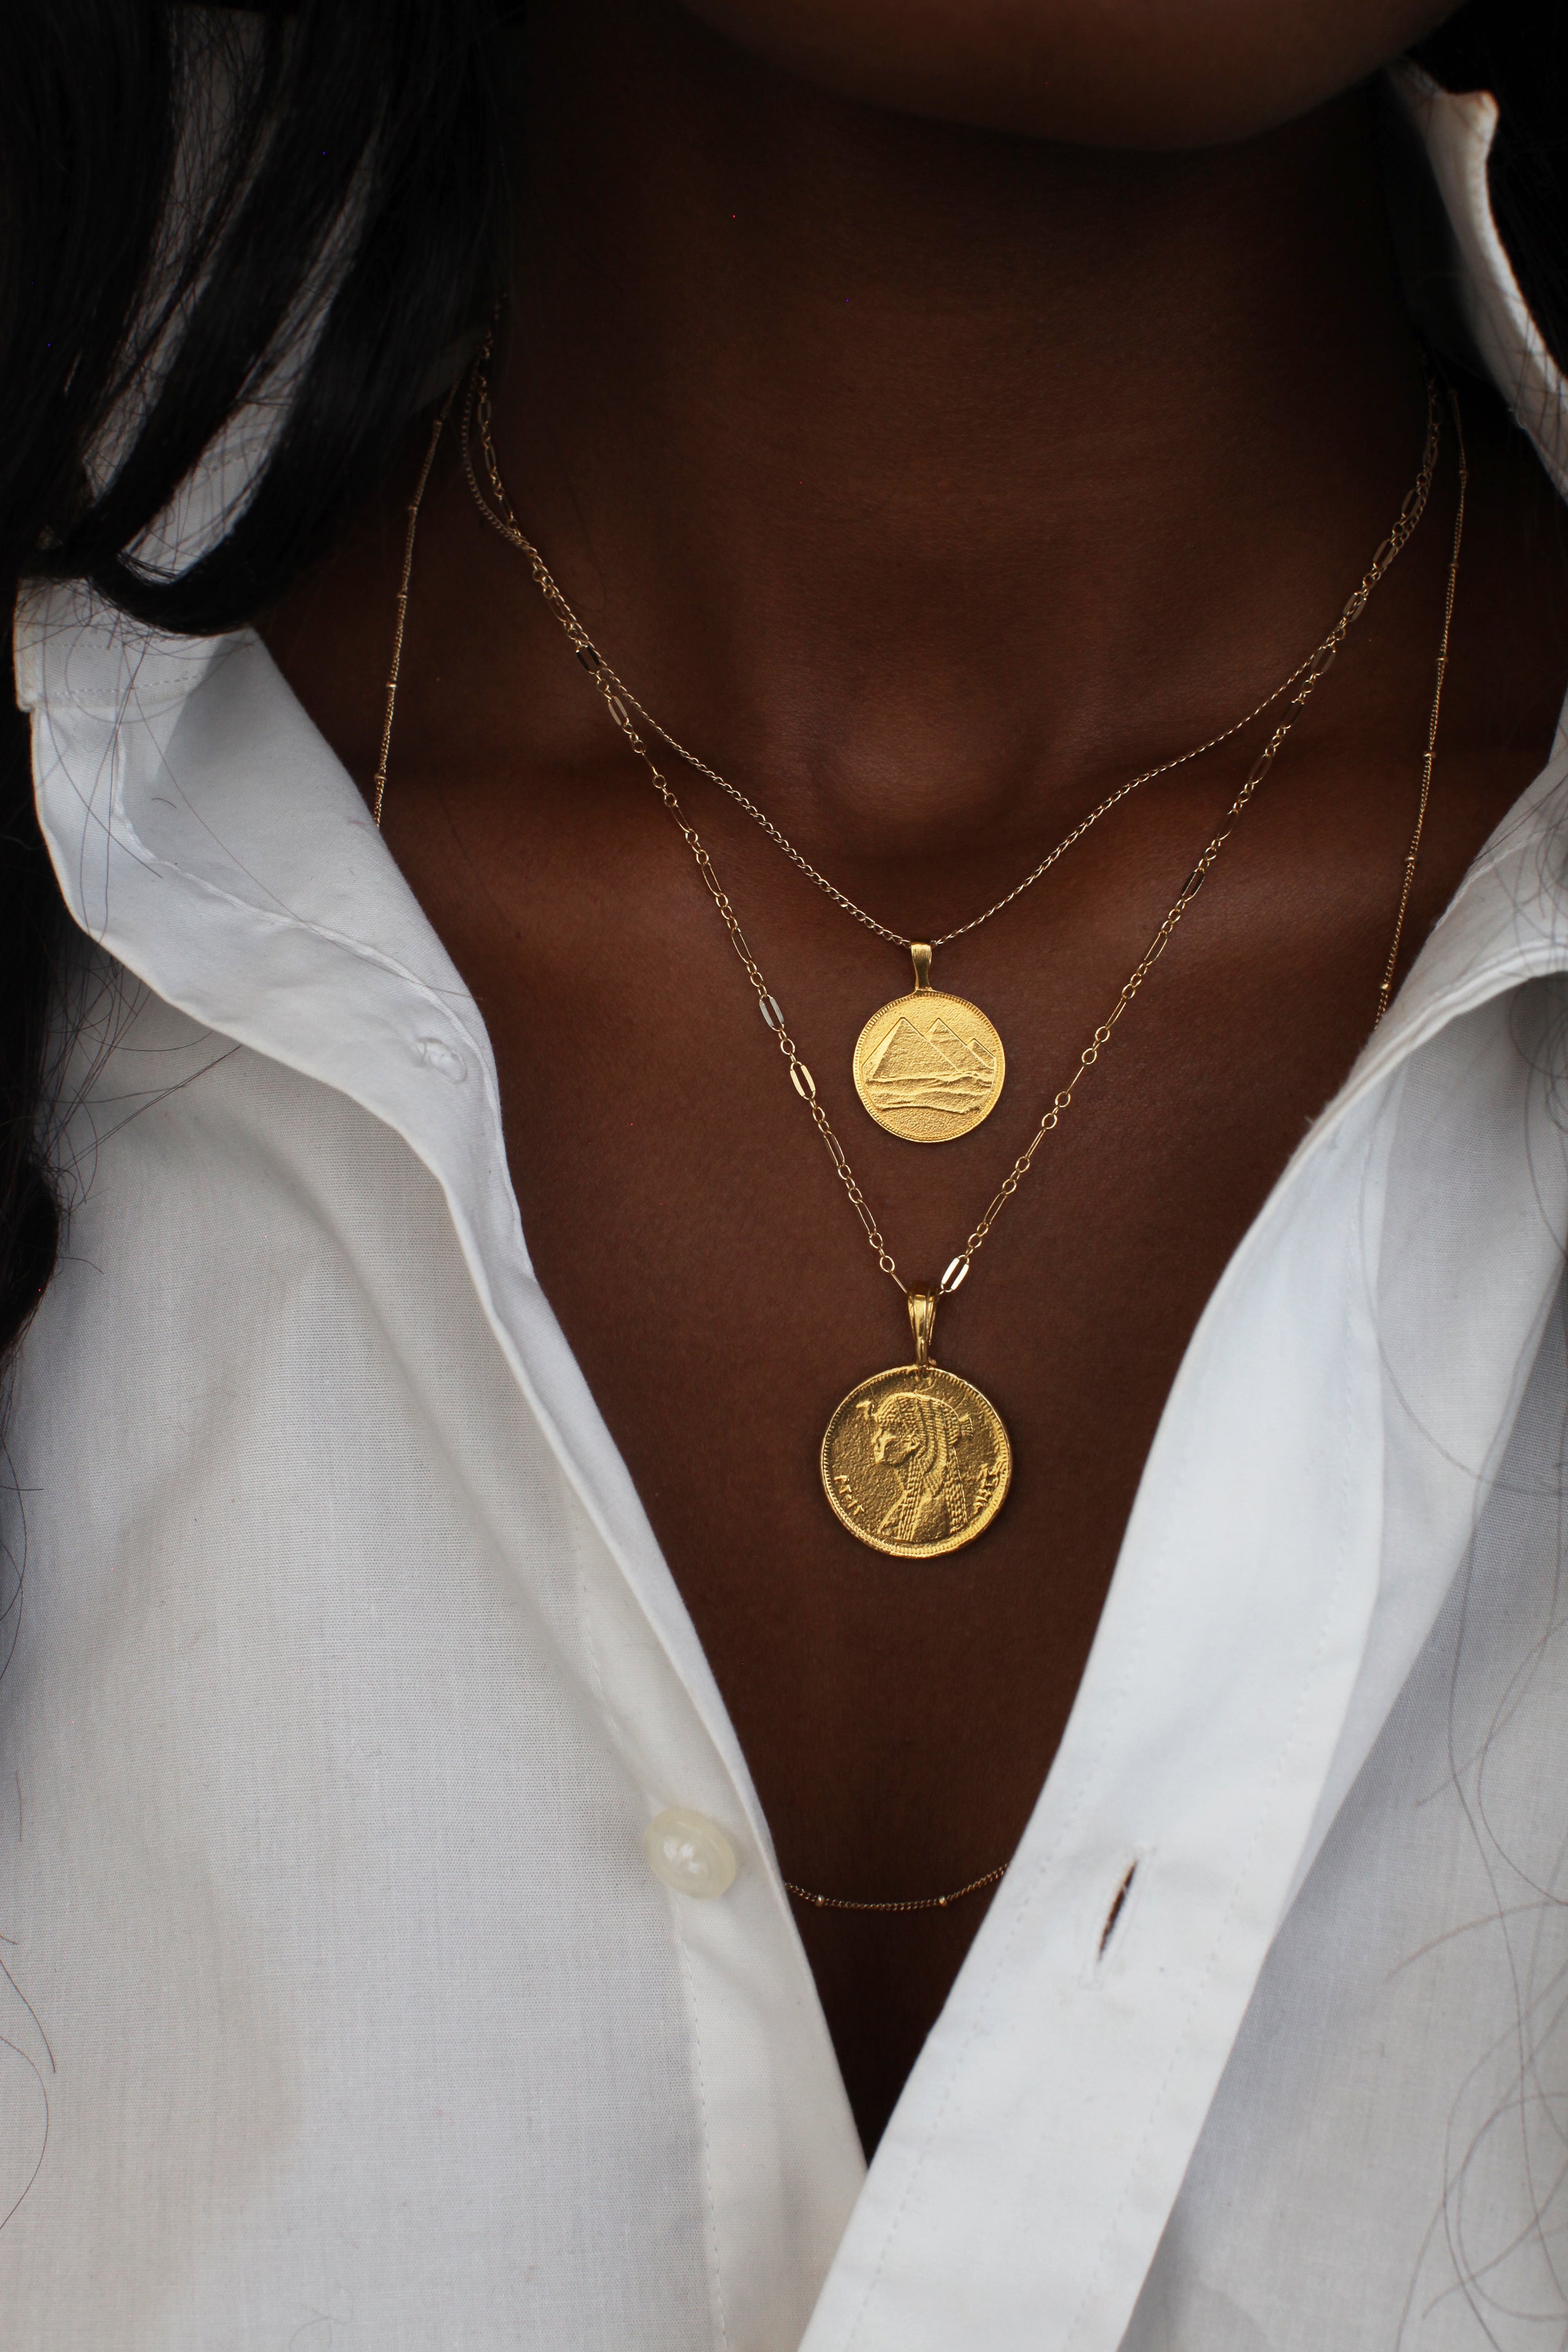 11 Gold Coin Necklaces We're Currently Coveting, Starting at $8